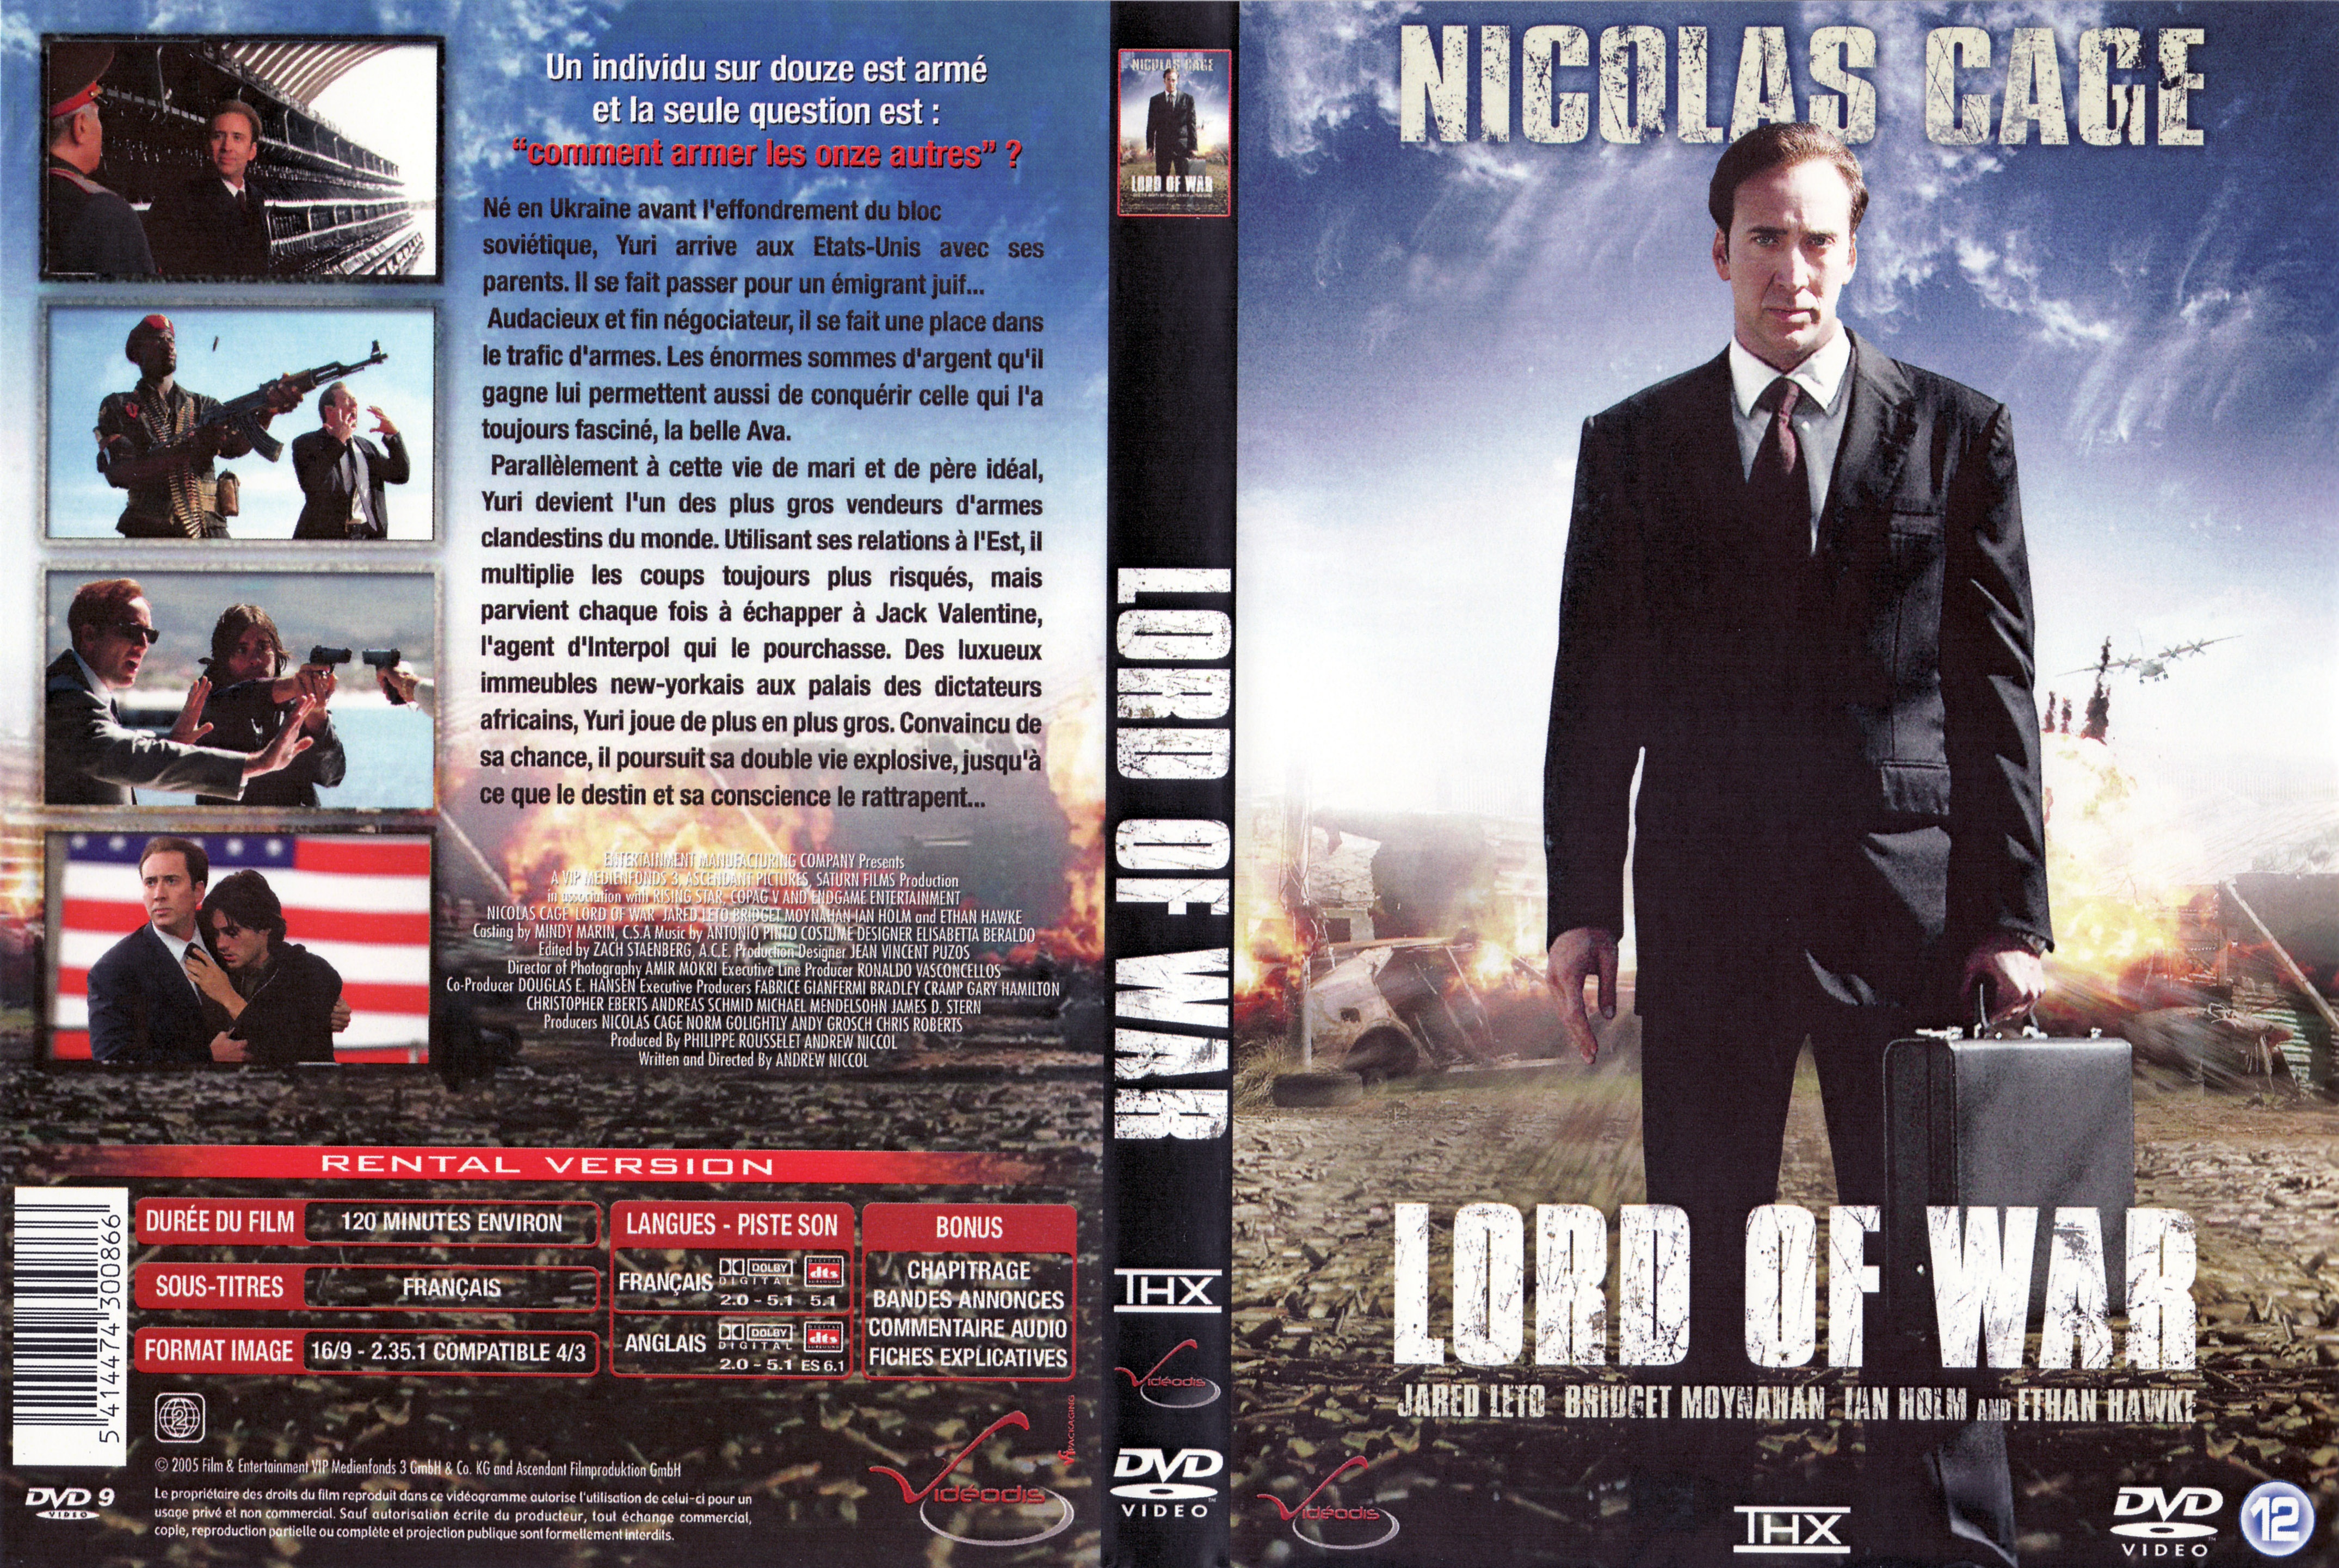 Jaquette DVD Lord of war v3